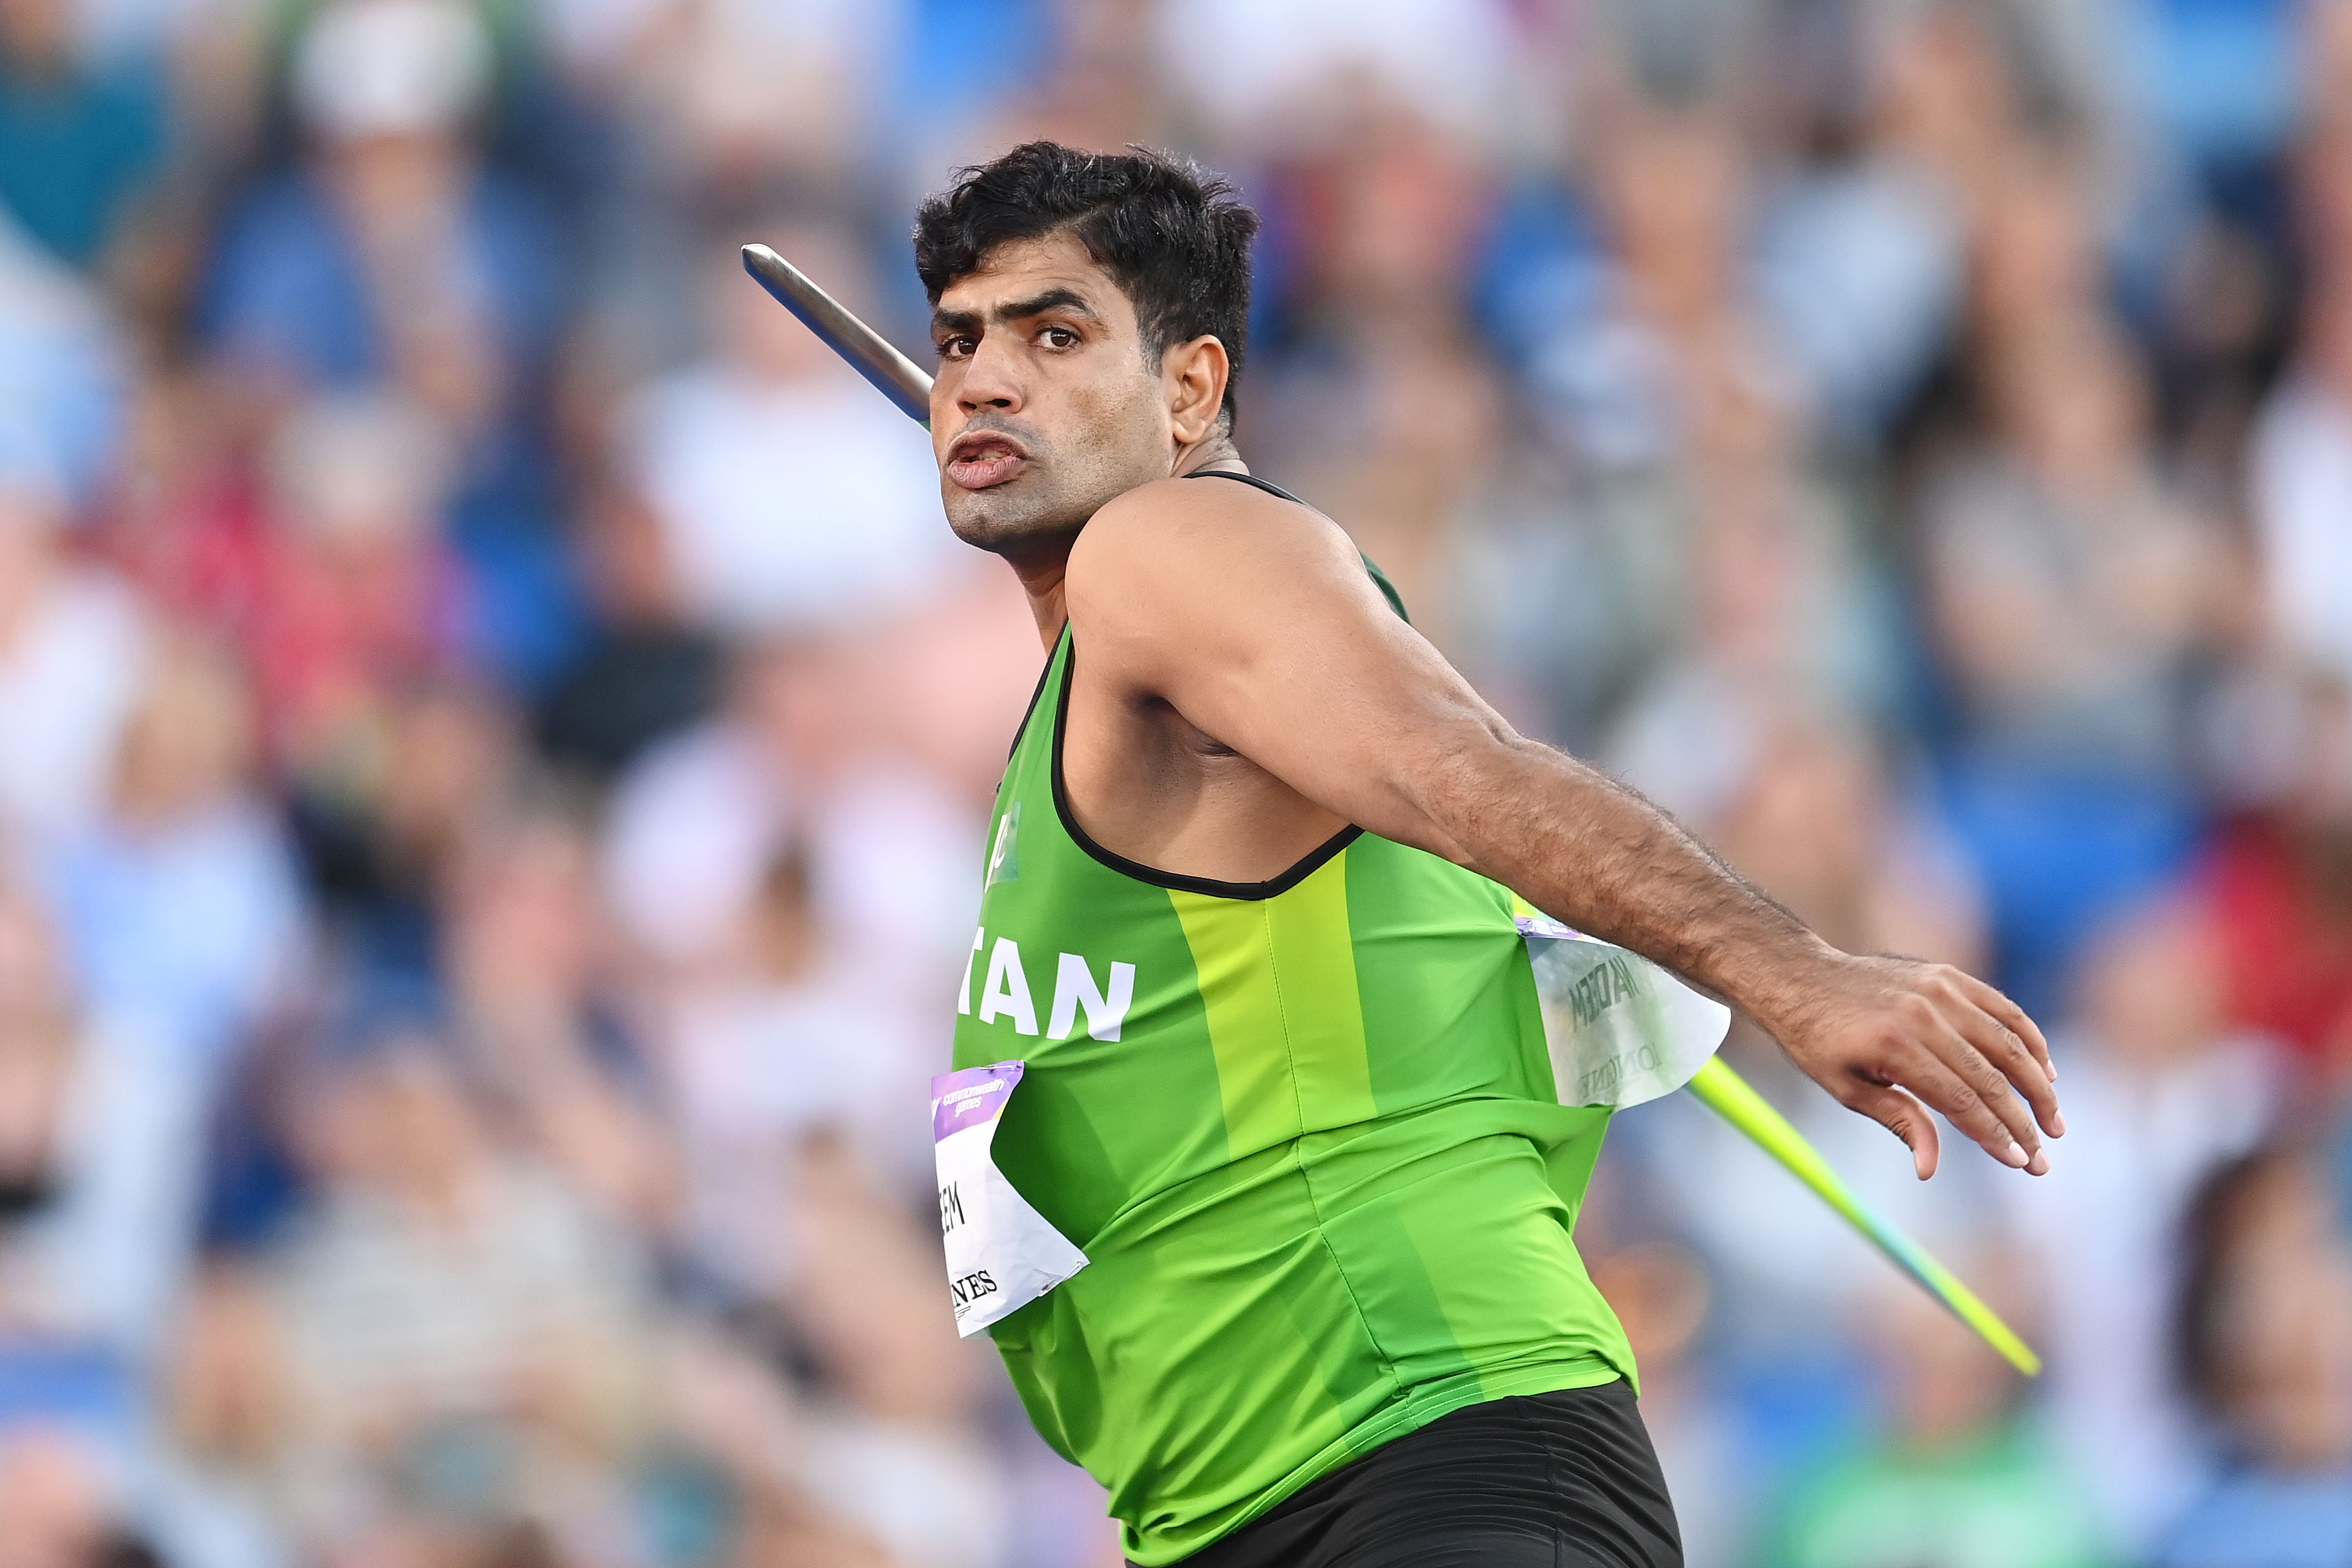 Arshad Nadeem in the javelin at the Commonwealth Games